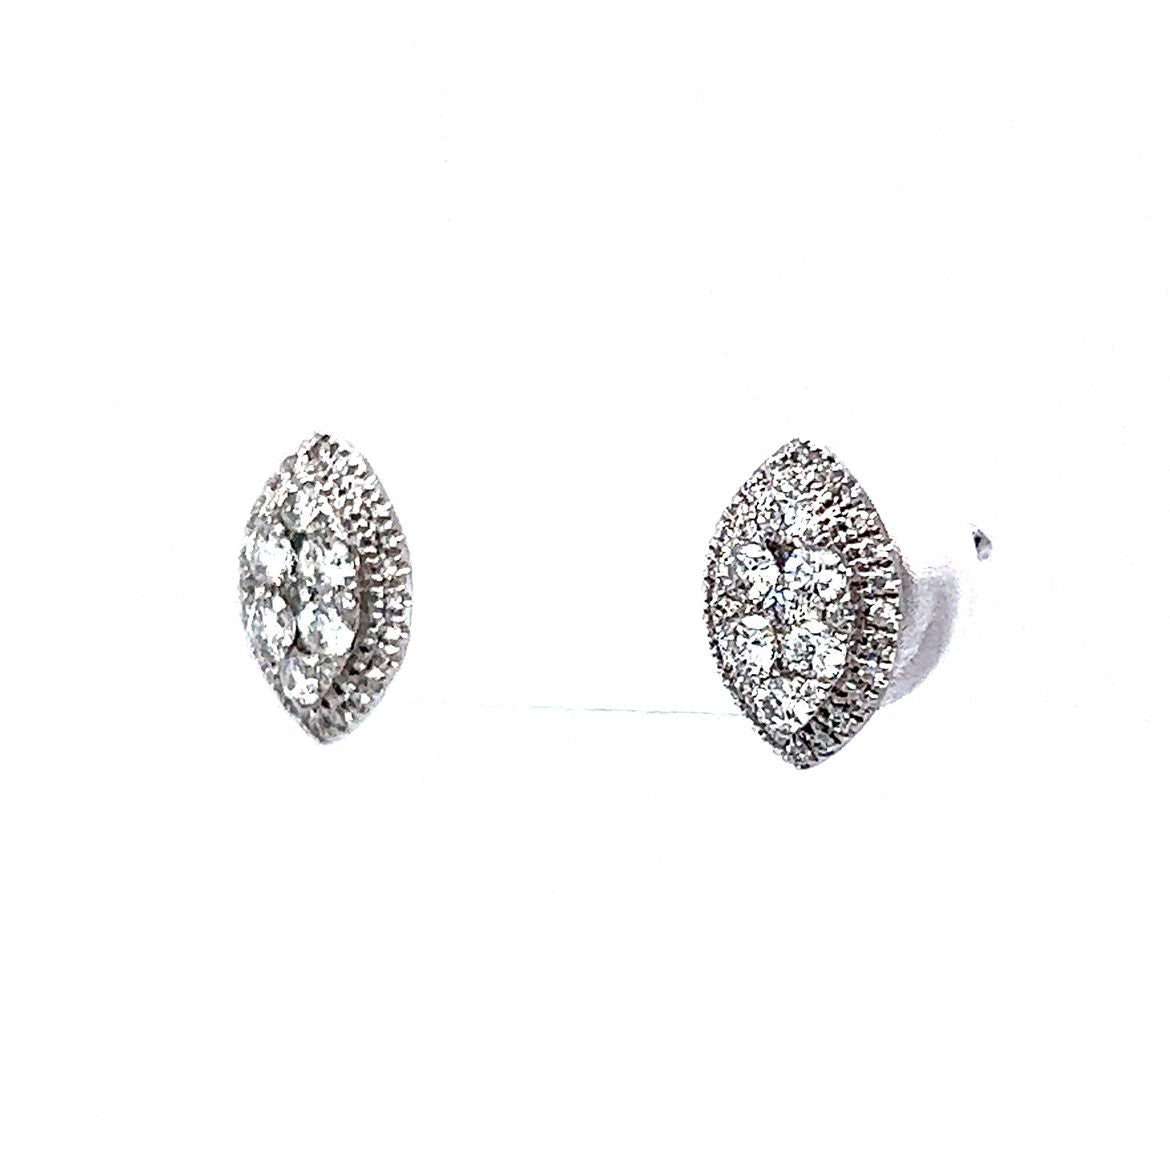 Marquis Pave Cluster Diamond Earrings 14K White Gold